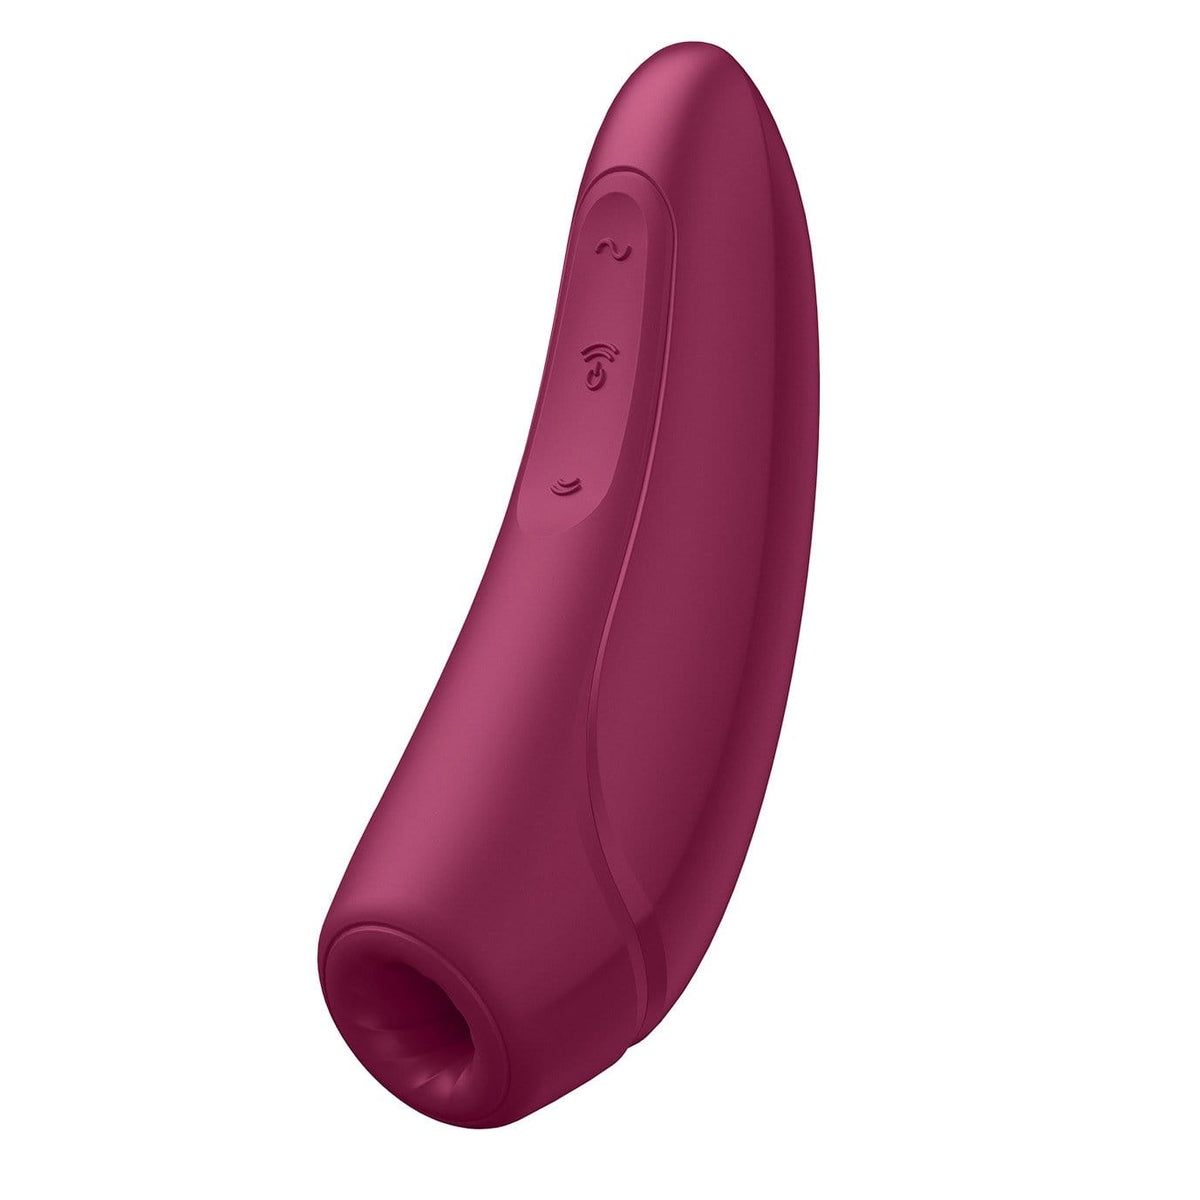 *FREE GIFT* Satisfyer - Curvy 1+ App-Controlled Clitoral Air Stimulator Vibrator (Rose Red) STF1133 CherryAffairs